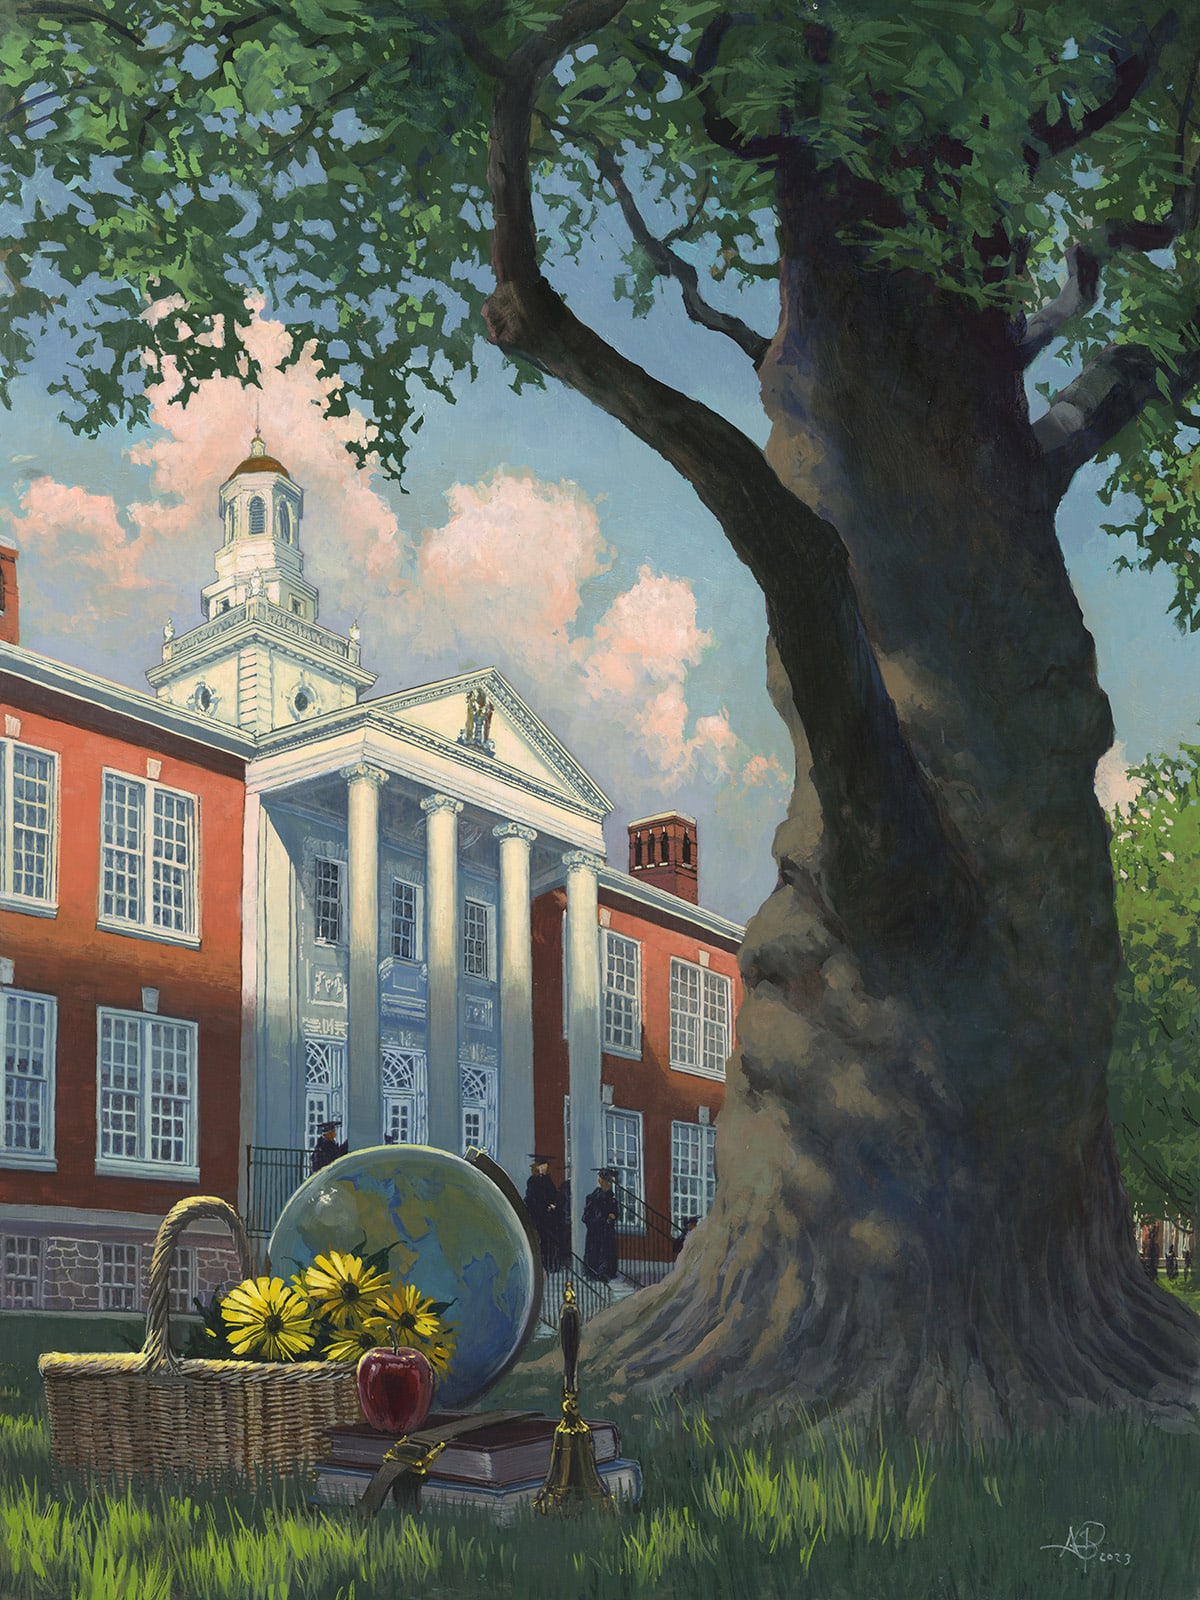 Centurial: painting reprint of Bunce Hall with graduates in the background and a basket with Brown-Eyed Susans, an apple, books, a globe and a bell under a tree.